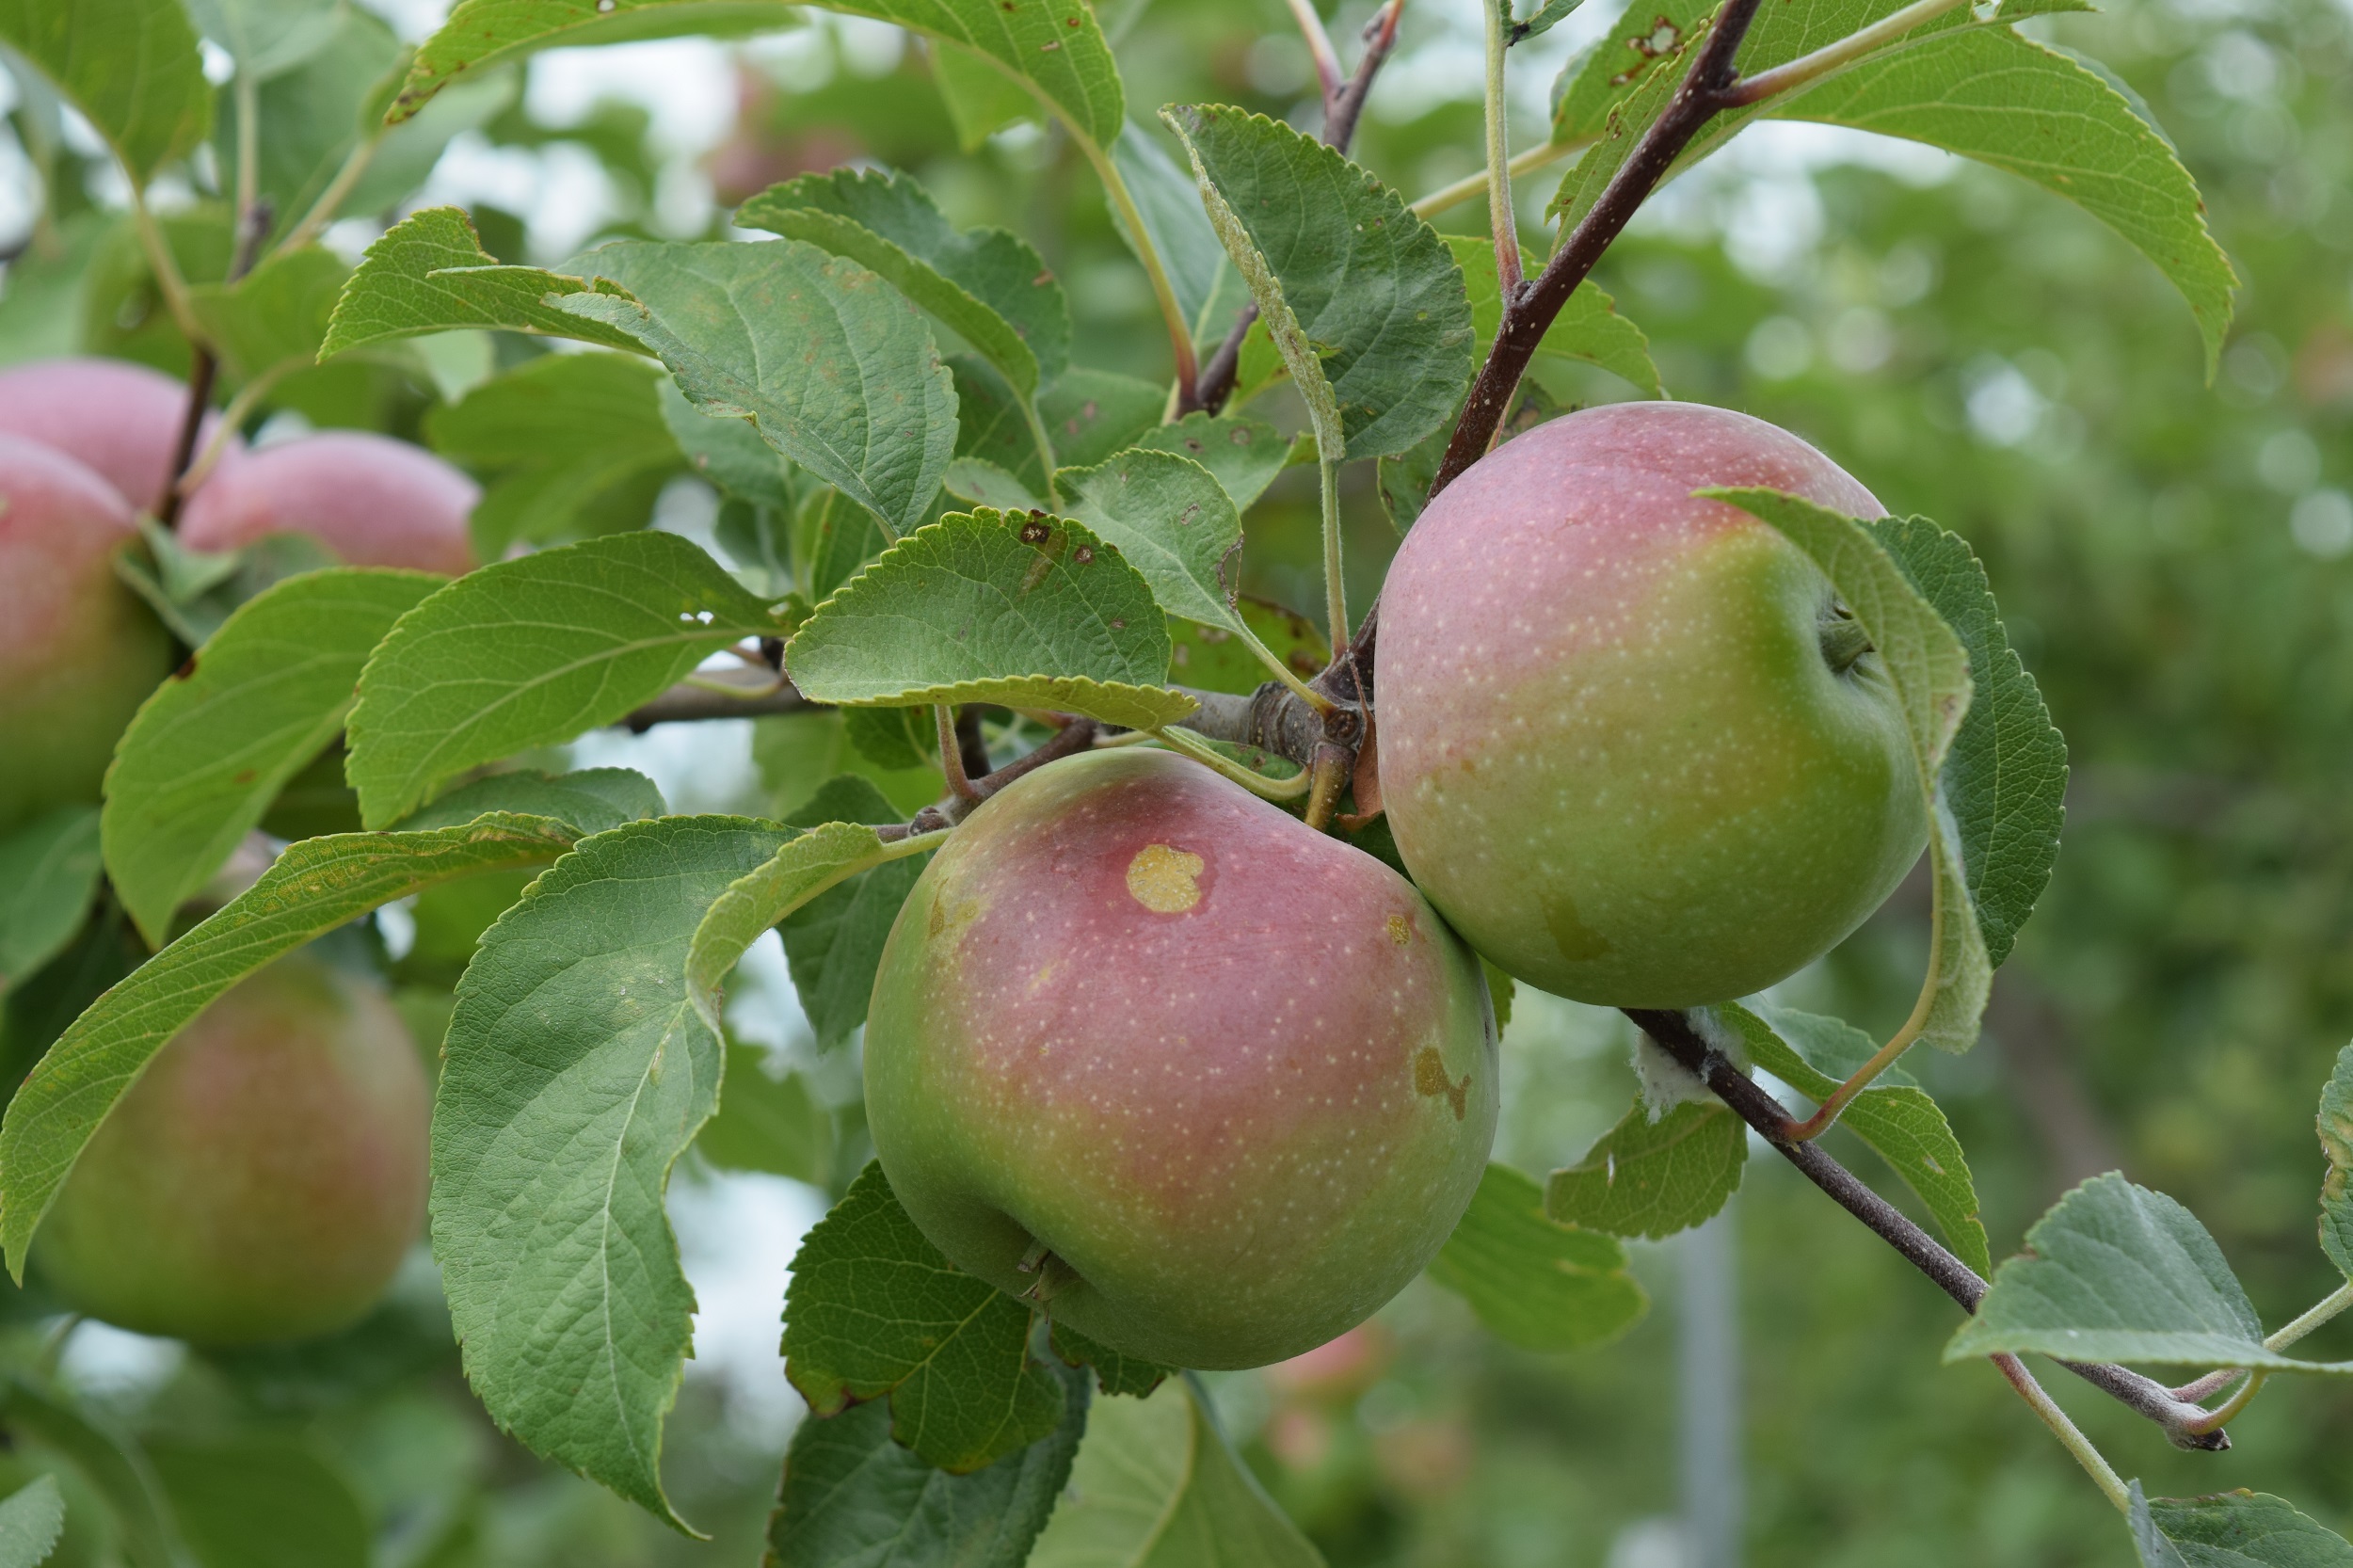 Apples growing on a tree. (Photo courtesy of Iowa State University Extension and Outreach.)